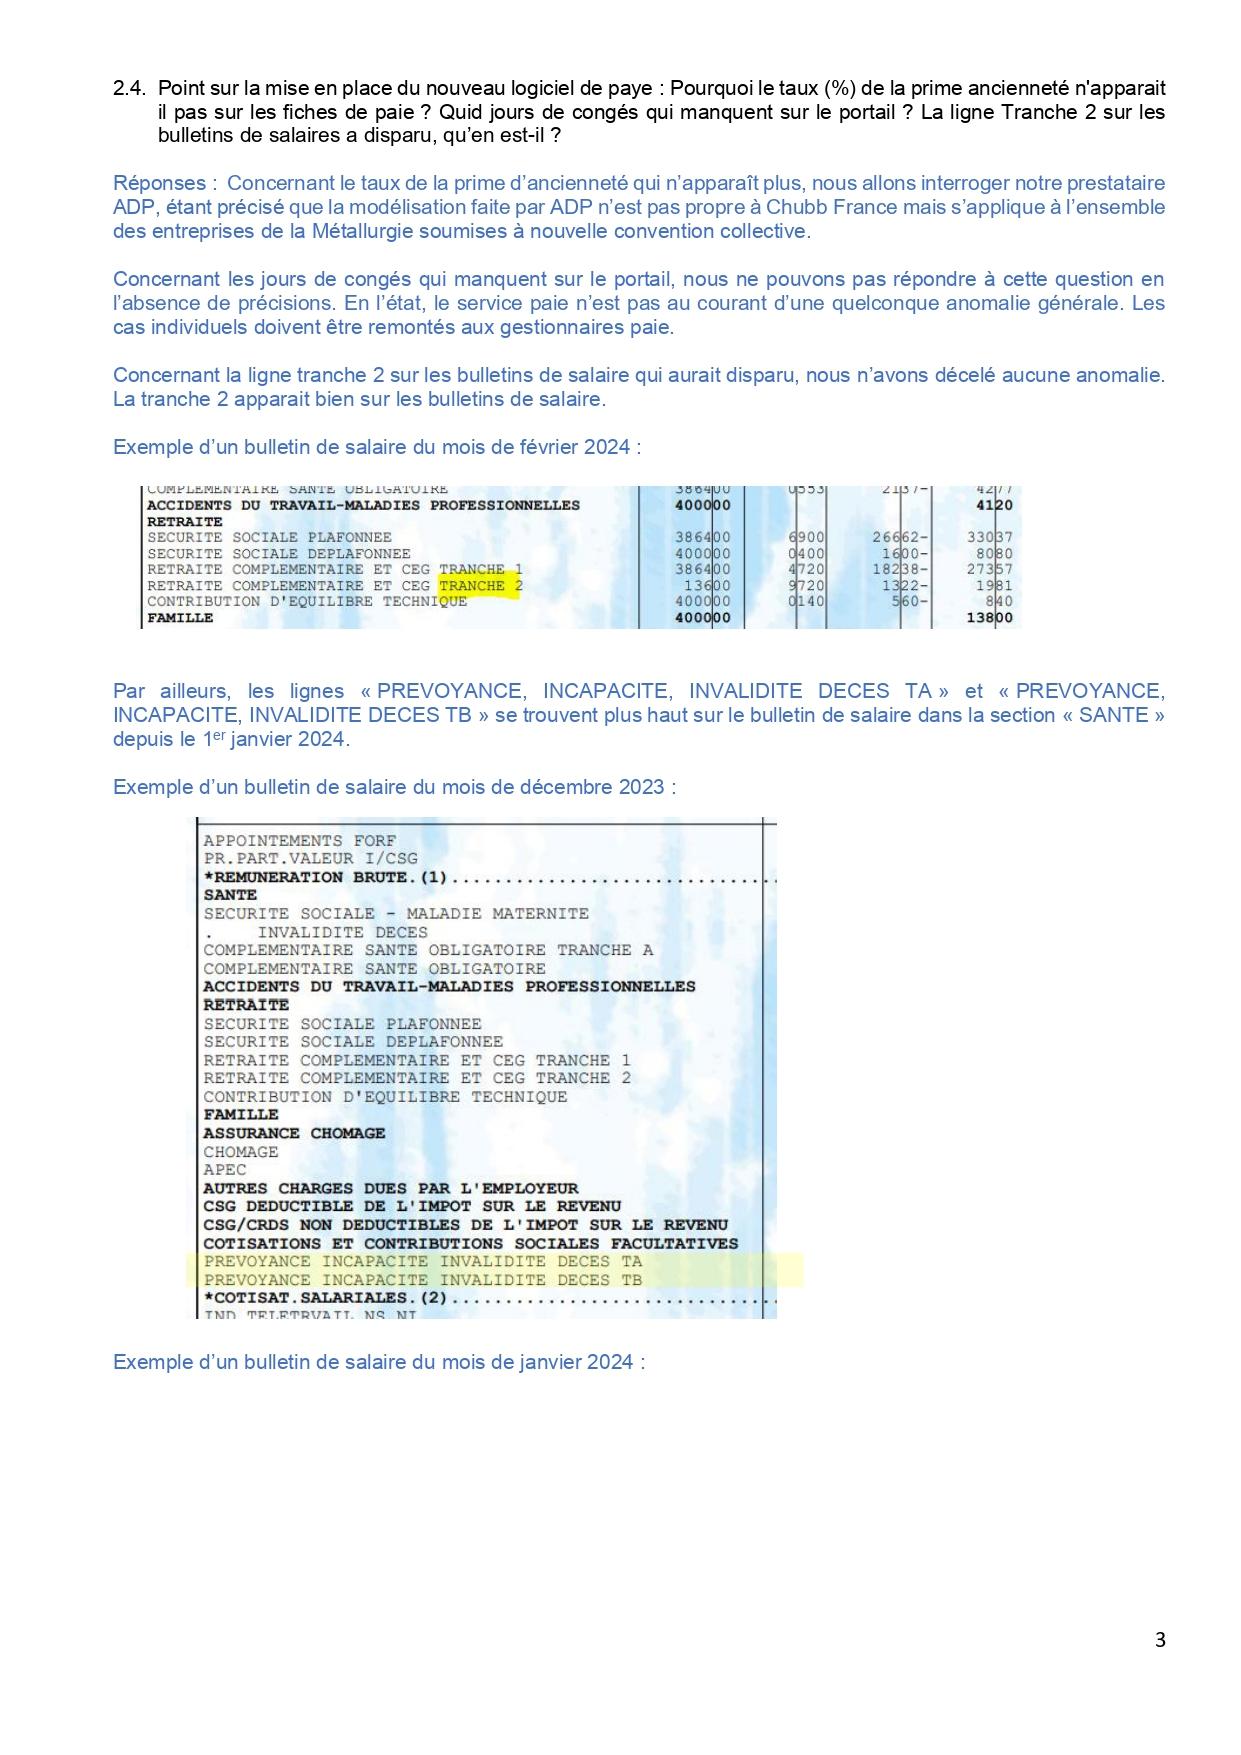 Reponses aux questions du cse 21 03 24 vdef pages to jpg 0003